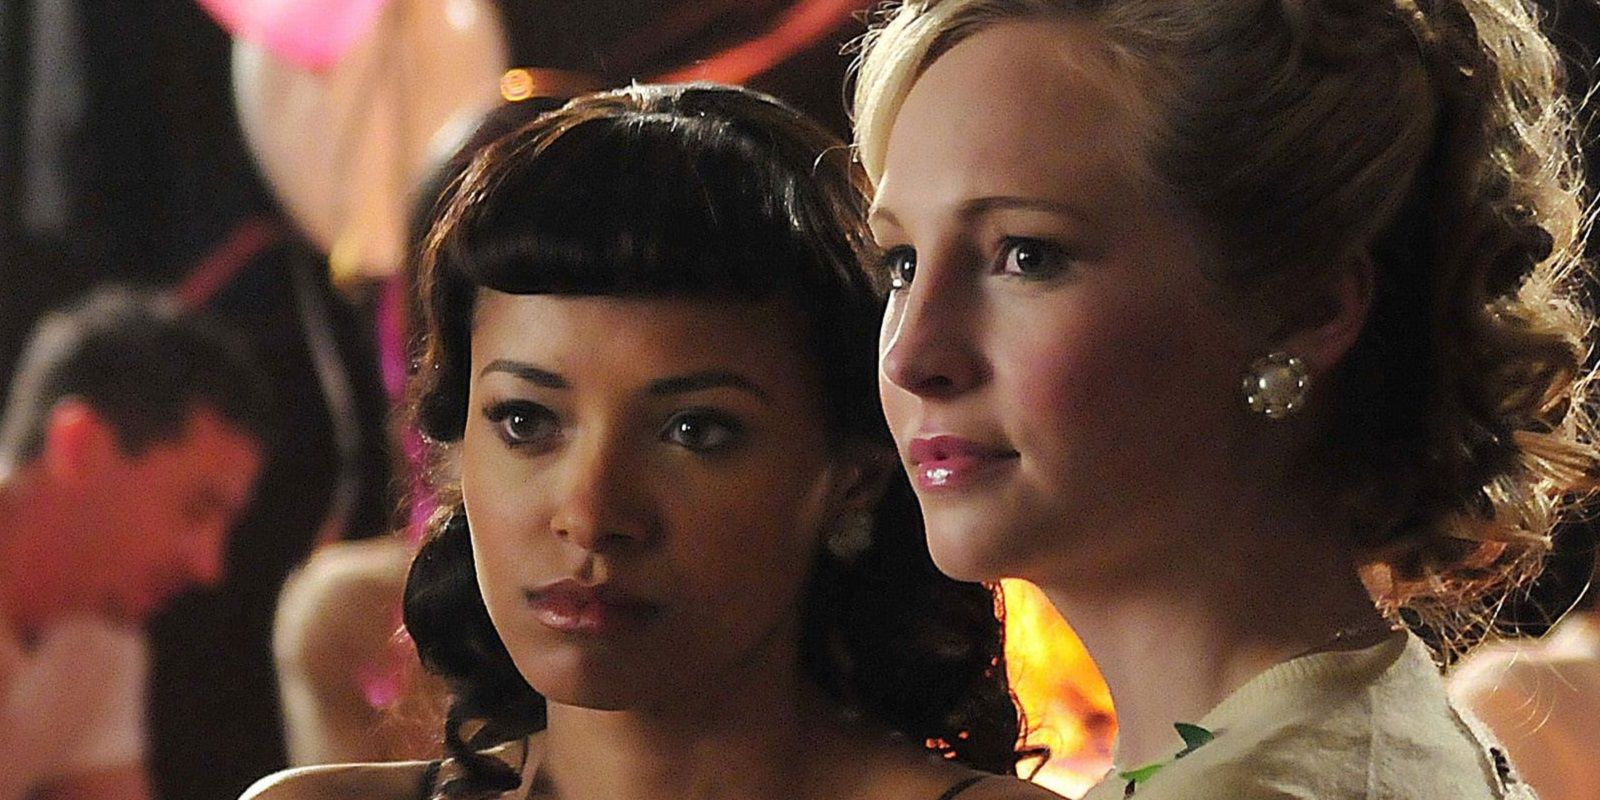 Bonnie and Caroline at a party in The Vampire Diaries